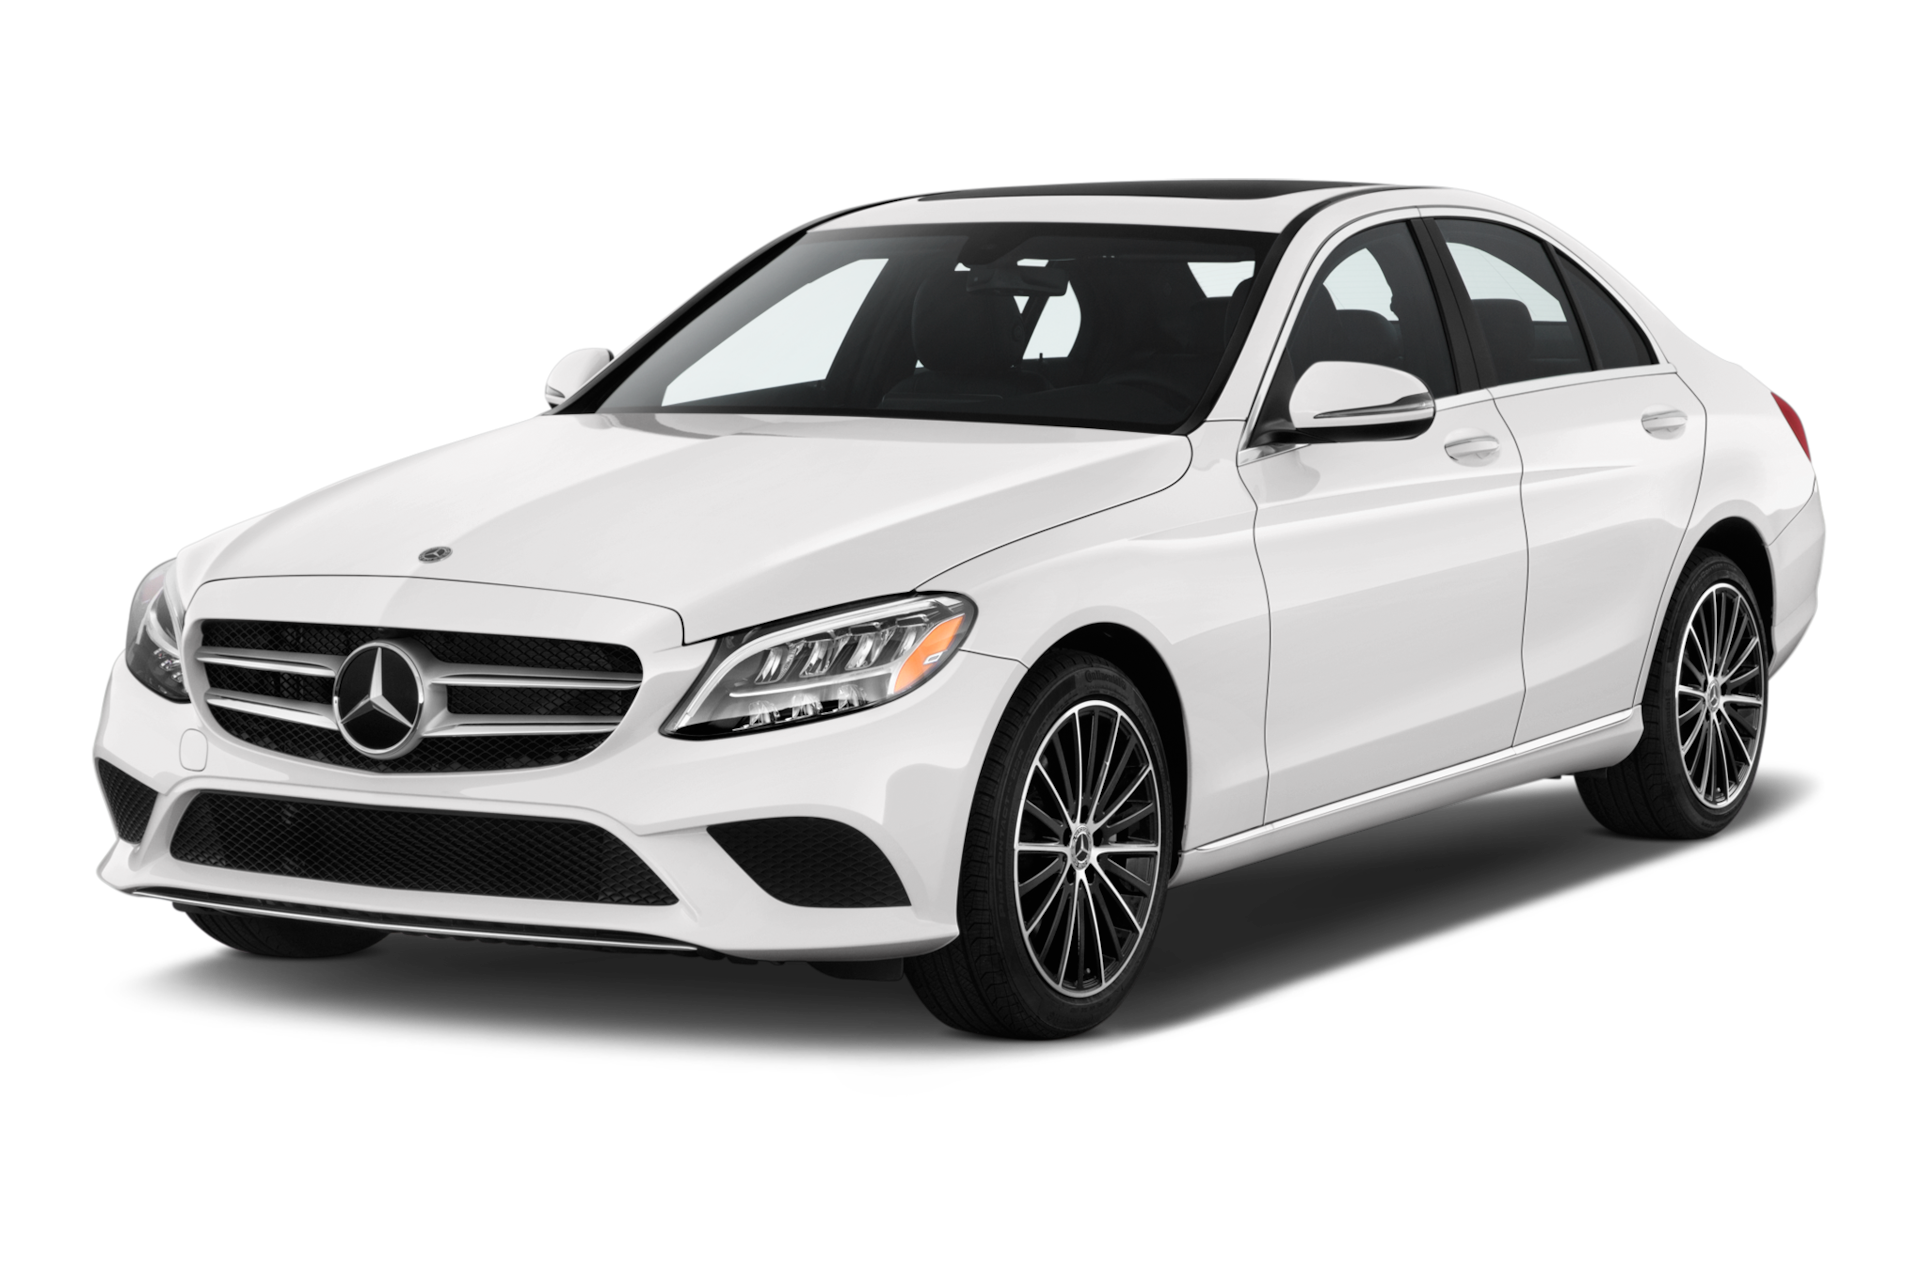 2019 Mercedes-Benz C-Class Prices, Reviews, and Photos - MotorTrend